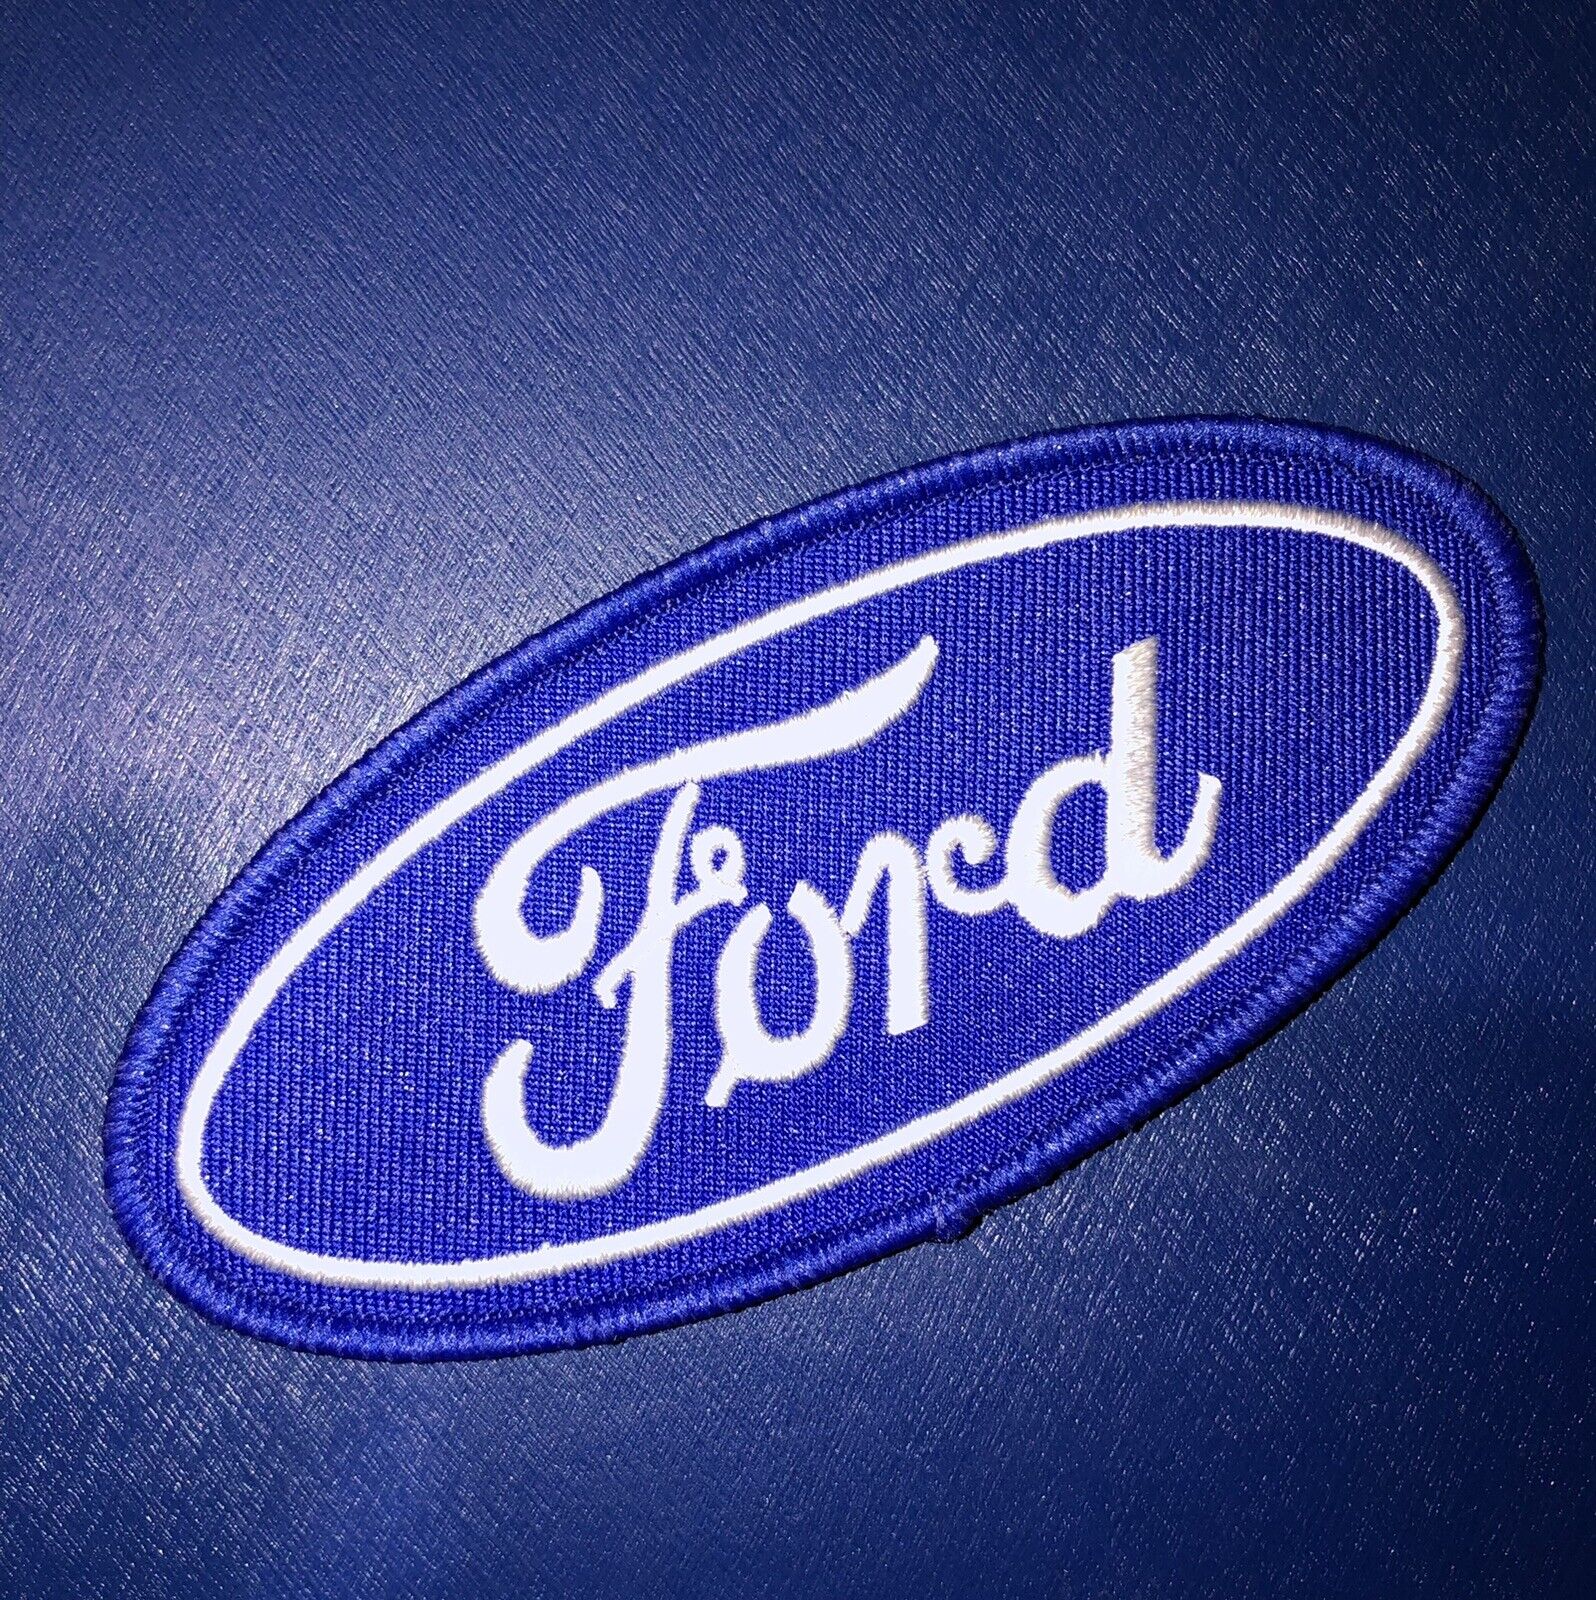 FORD Oval emblem Embroidered/ Woven Iron On Patch 2”x4.5” Blue